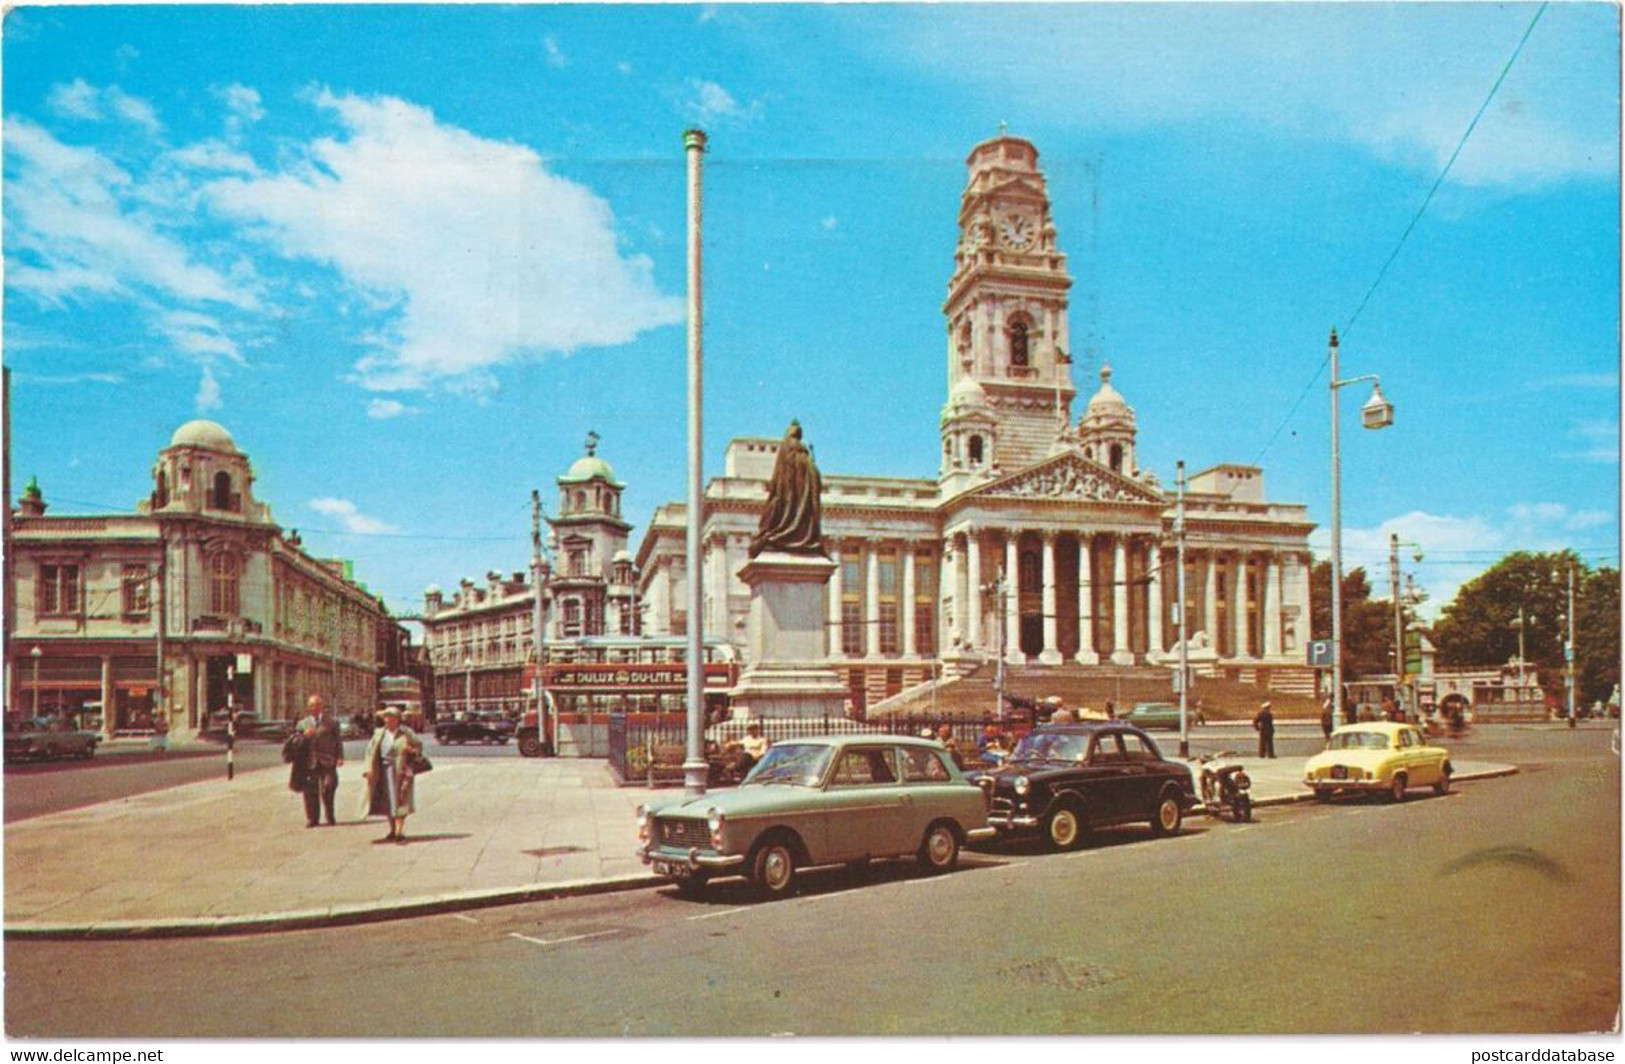 Portsmouth - The Guildhall - & Old Cars - Portsmouth